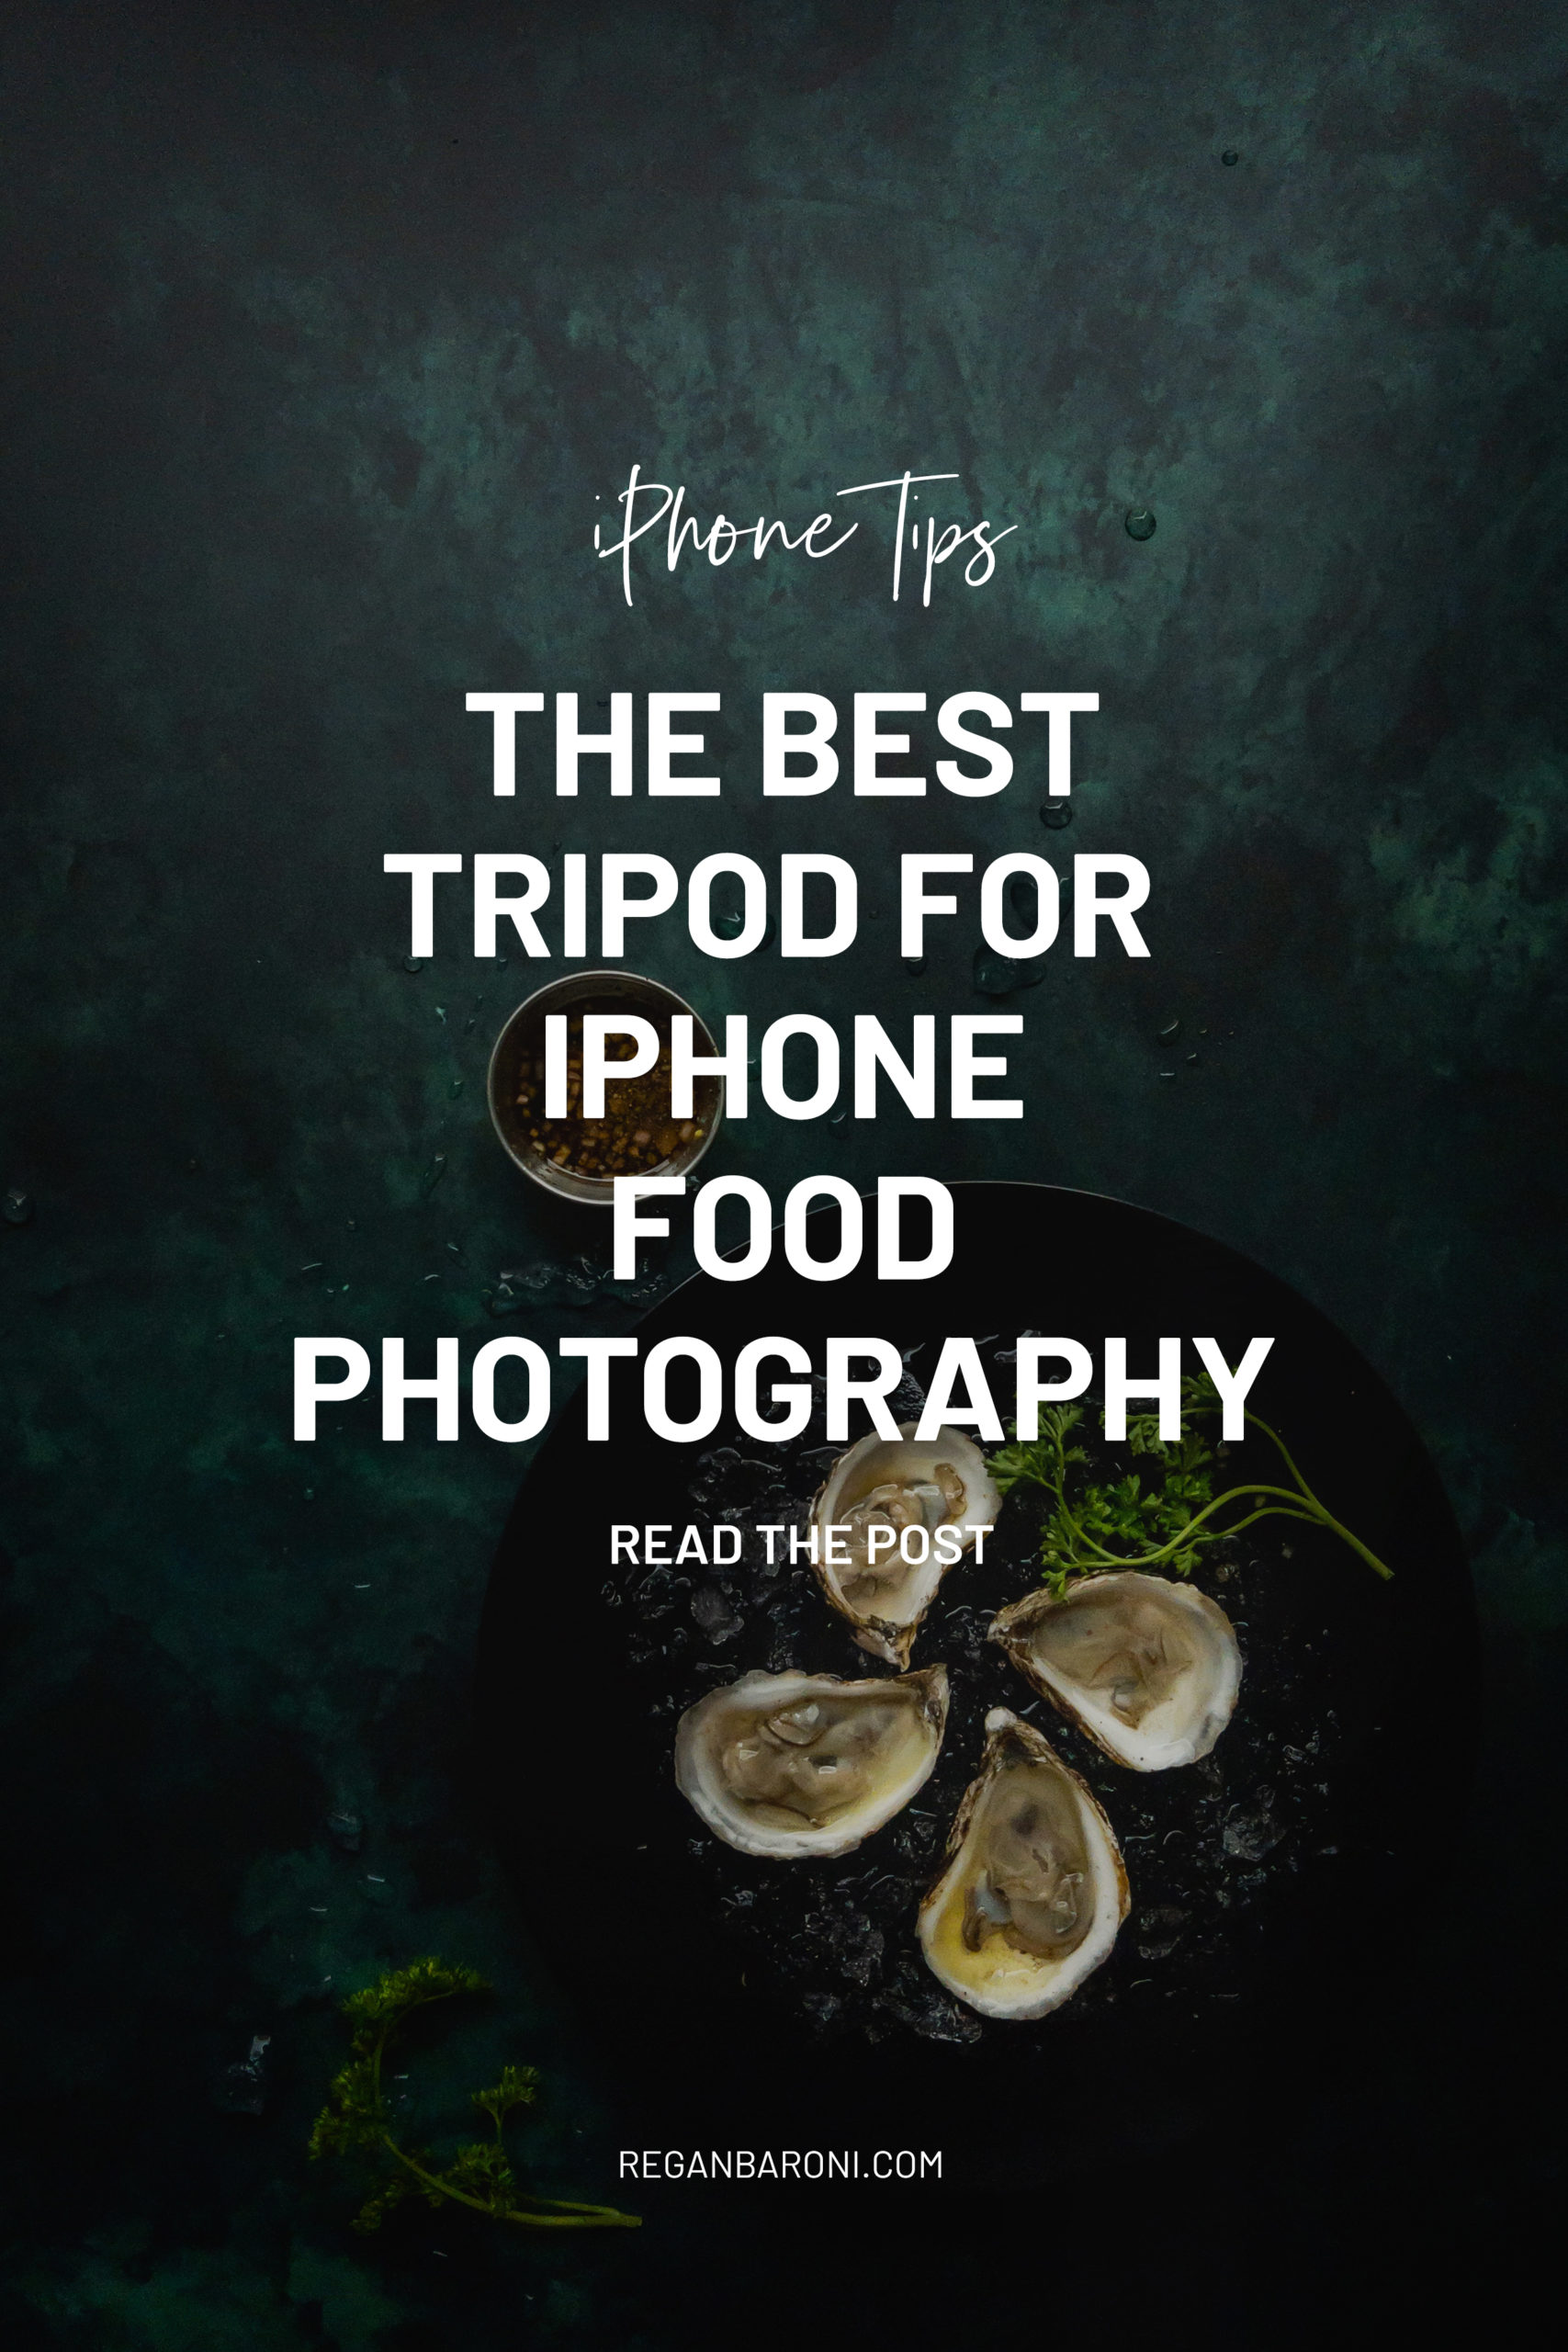 tripod for iPhone food photography